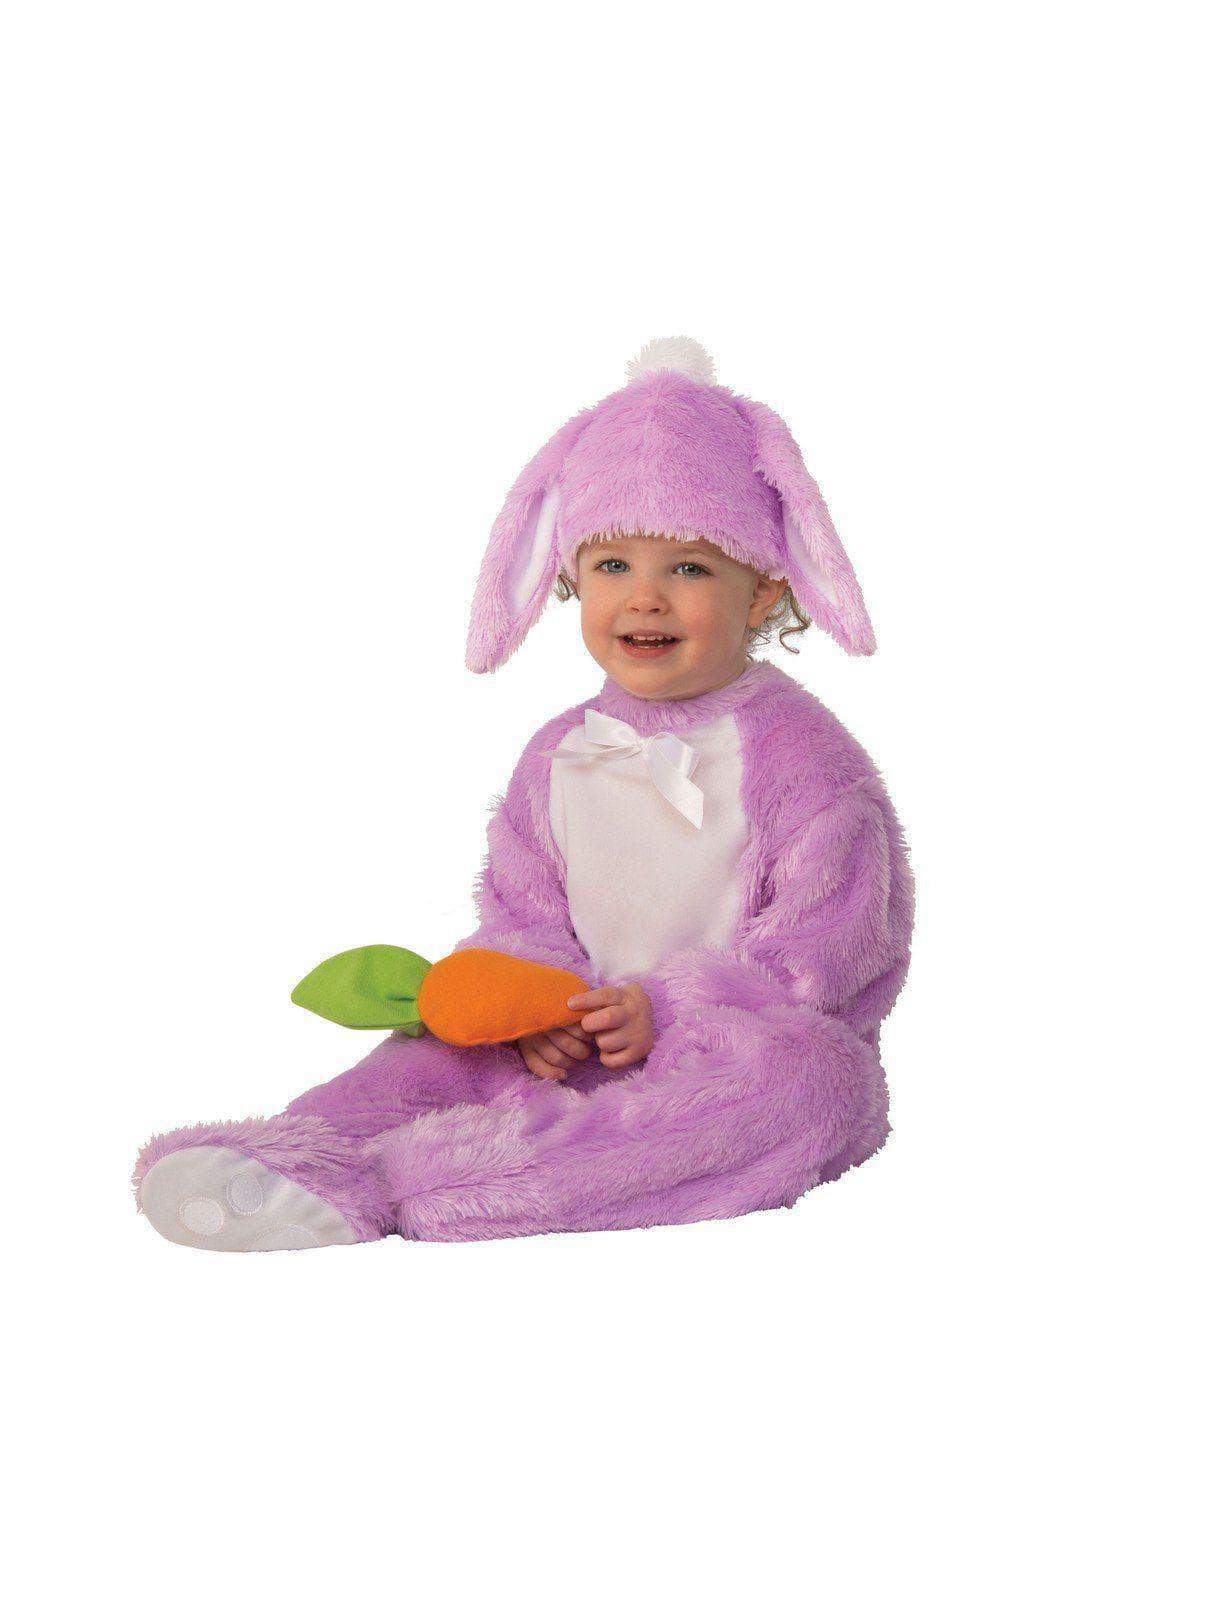 Baby/Toddler Lavender Bunny Costume - costumes.com